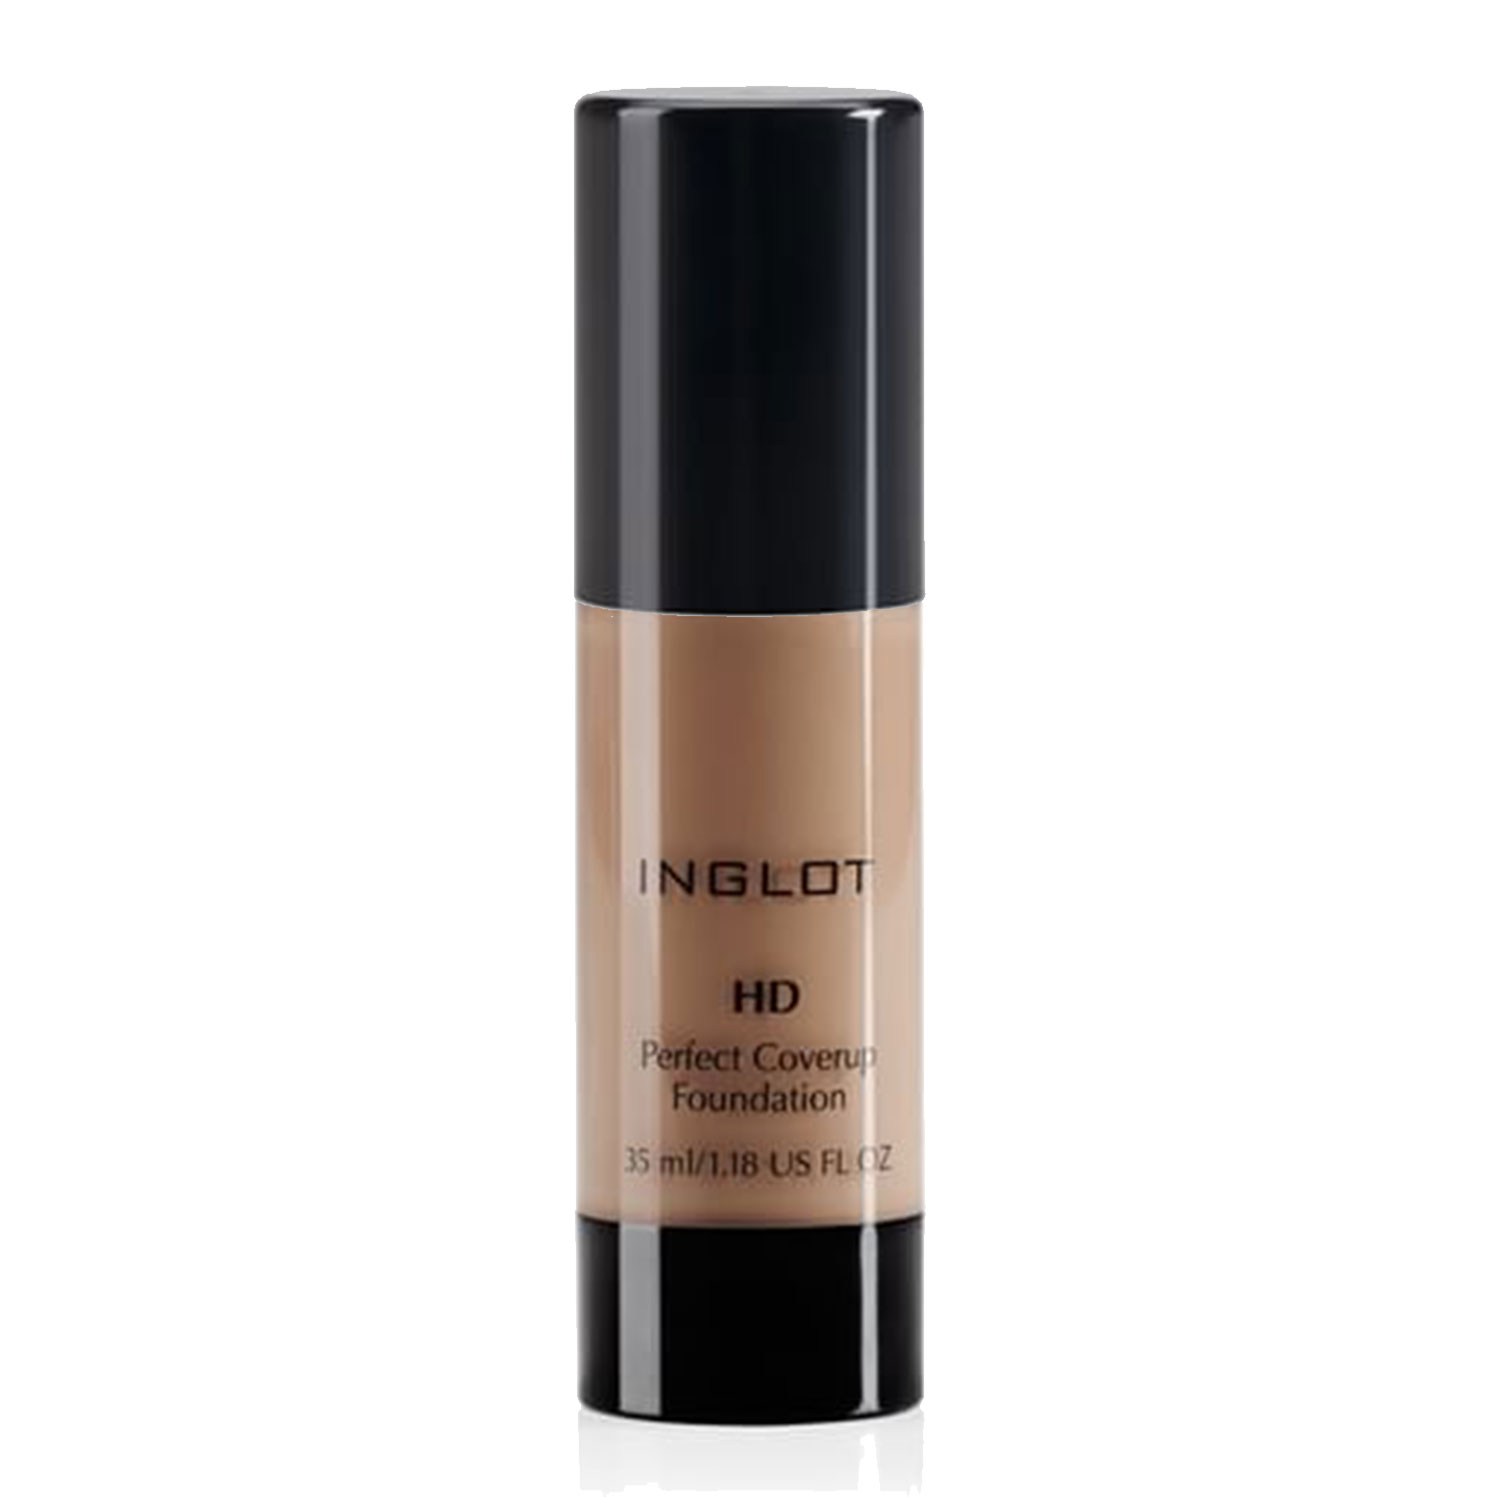 Inglot Hd Perfect Coverup Foundation, 35ml-75 Brown